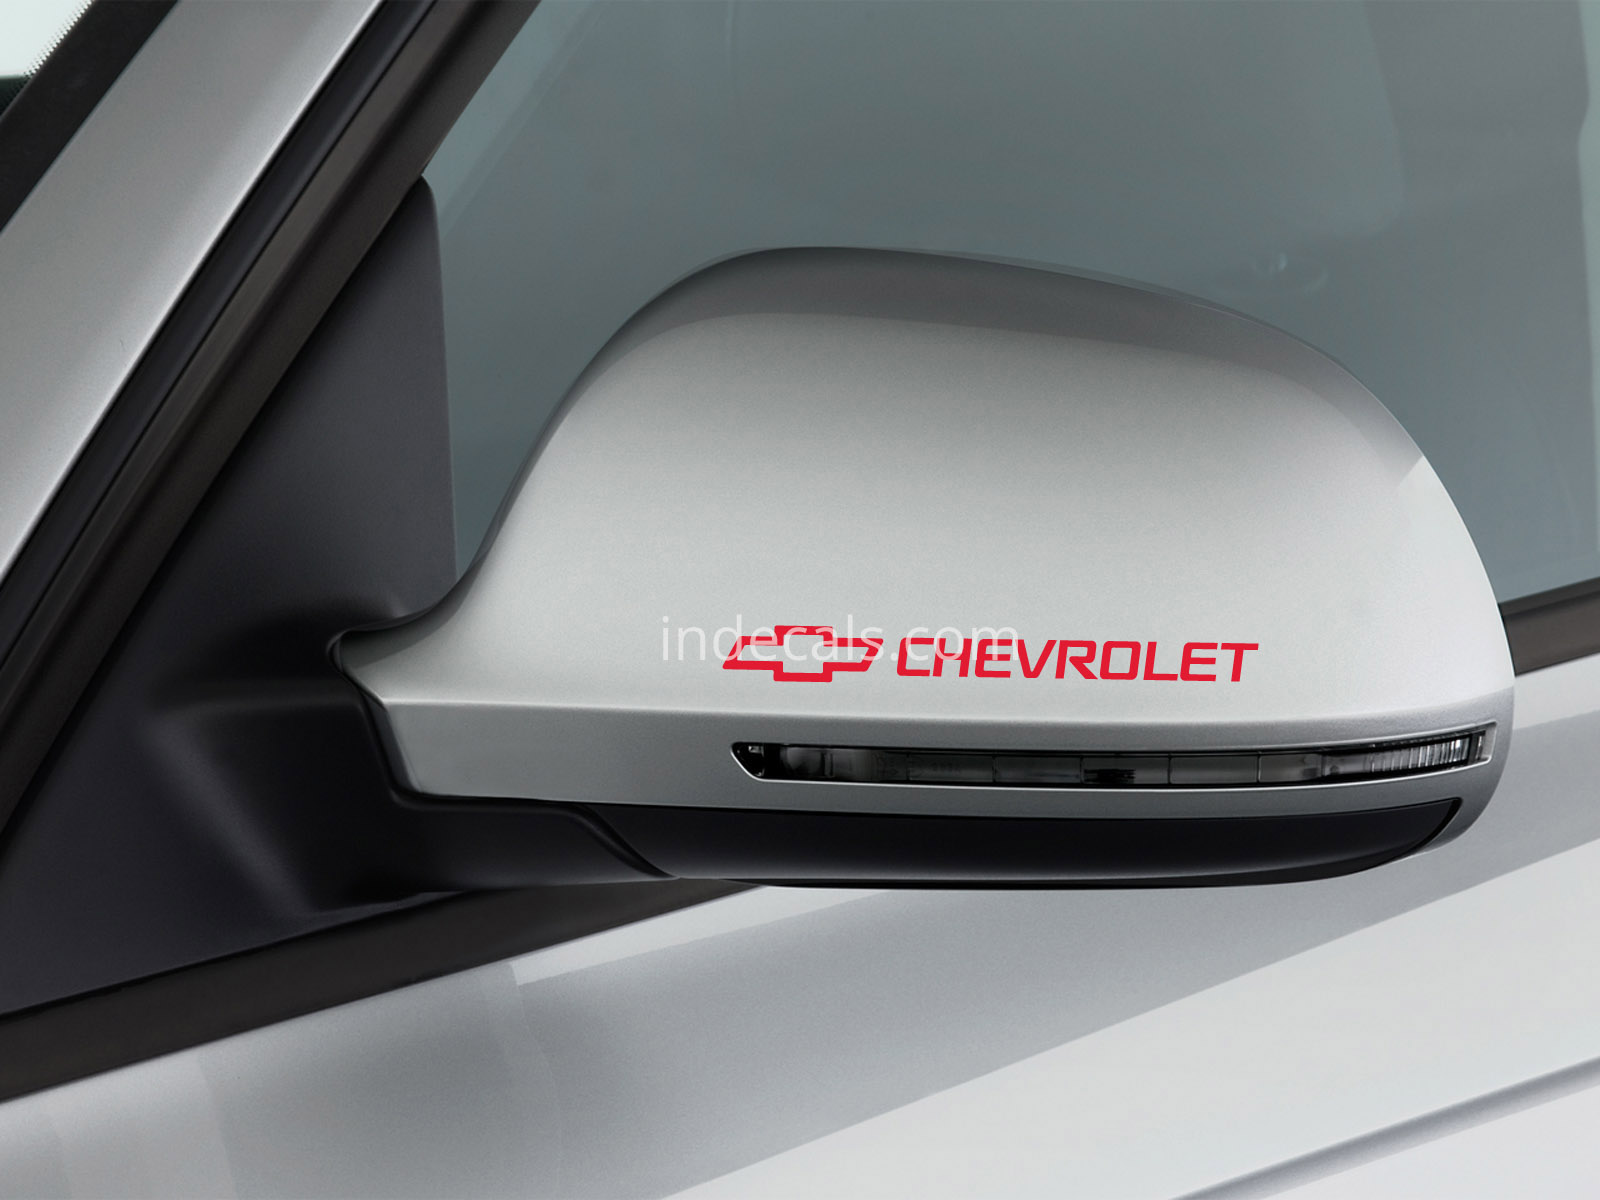 3 x Chevrolet Stickers for Mirrors - White